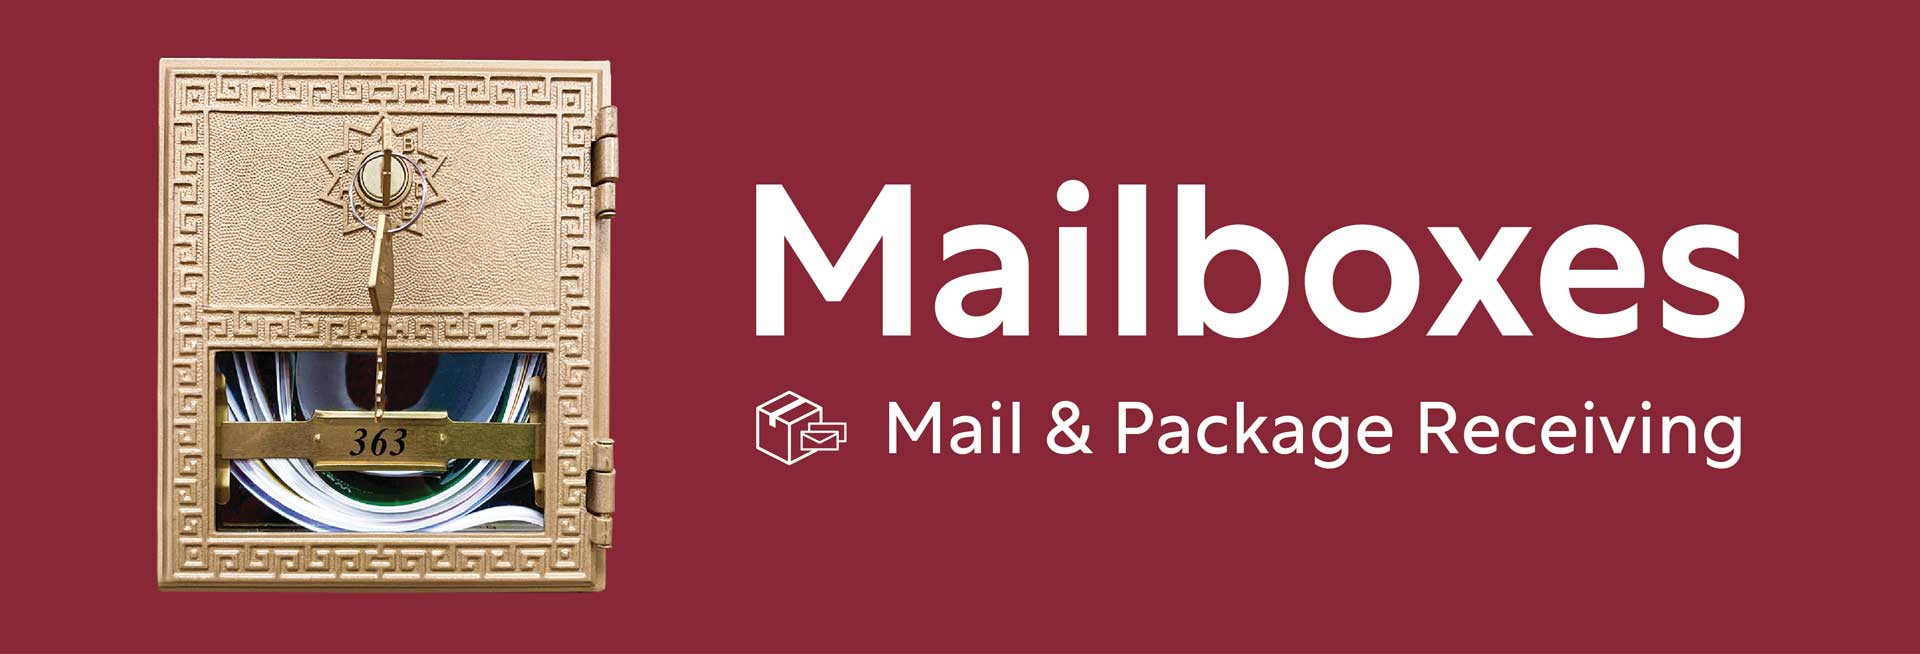 Mailboxes - Mail and Package Receiving.